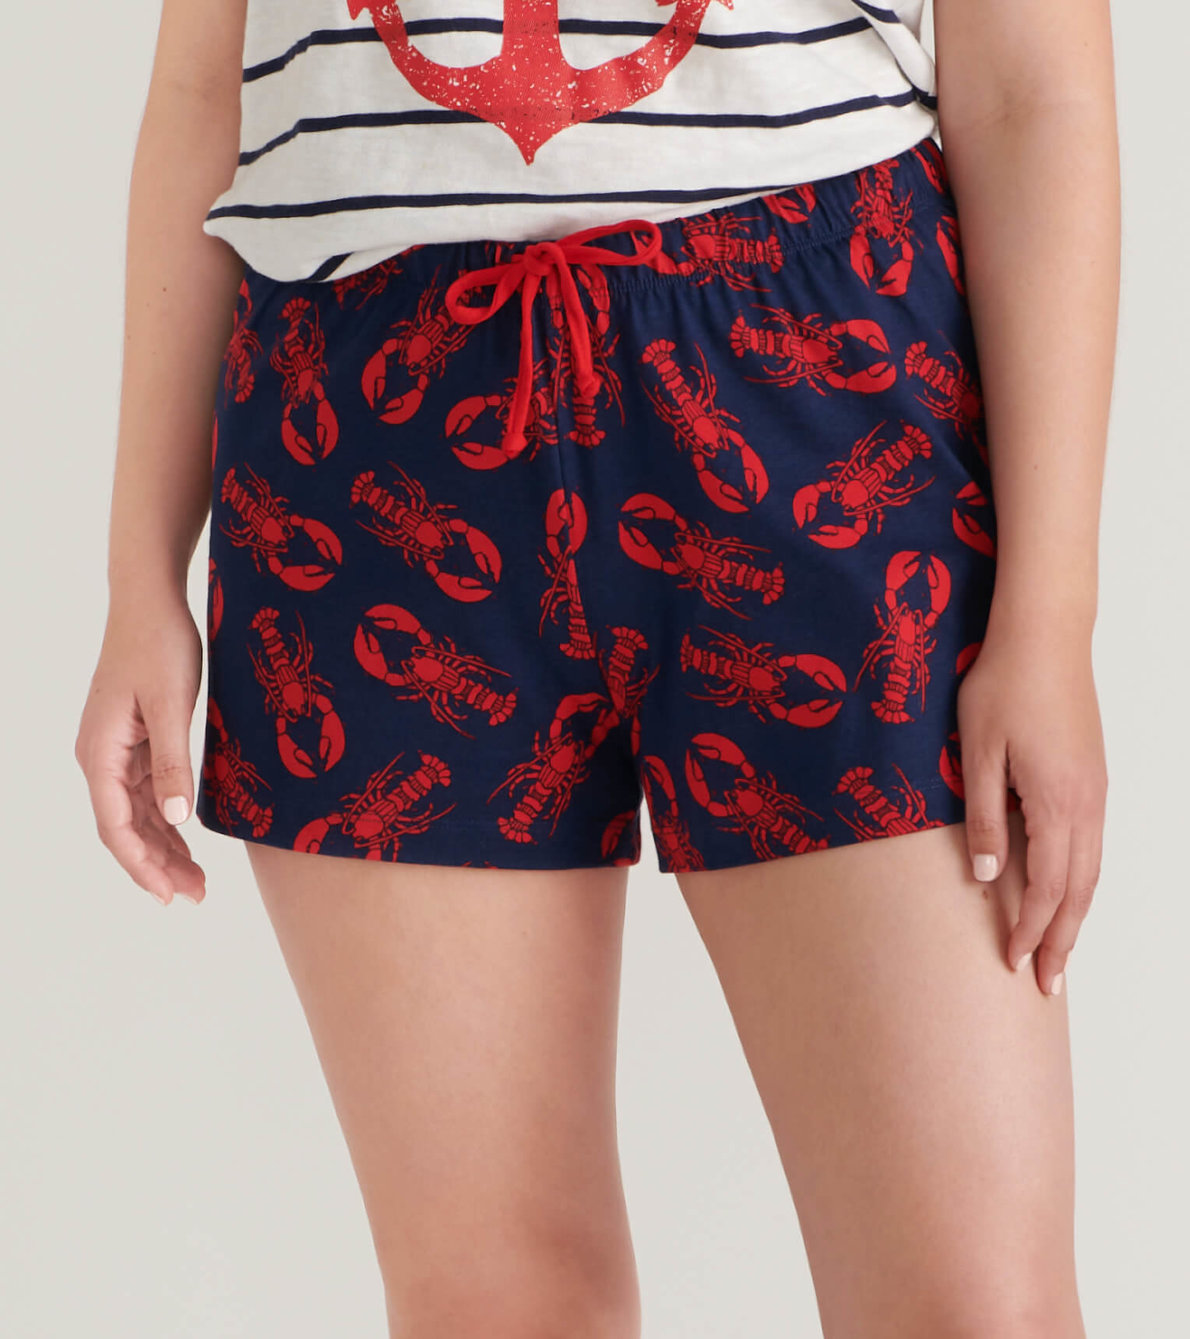 View larger image of Navy Lobster Women's Sleep Shorts